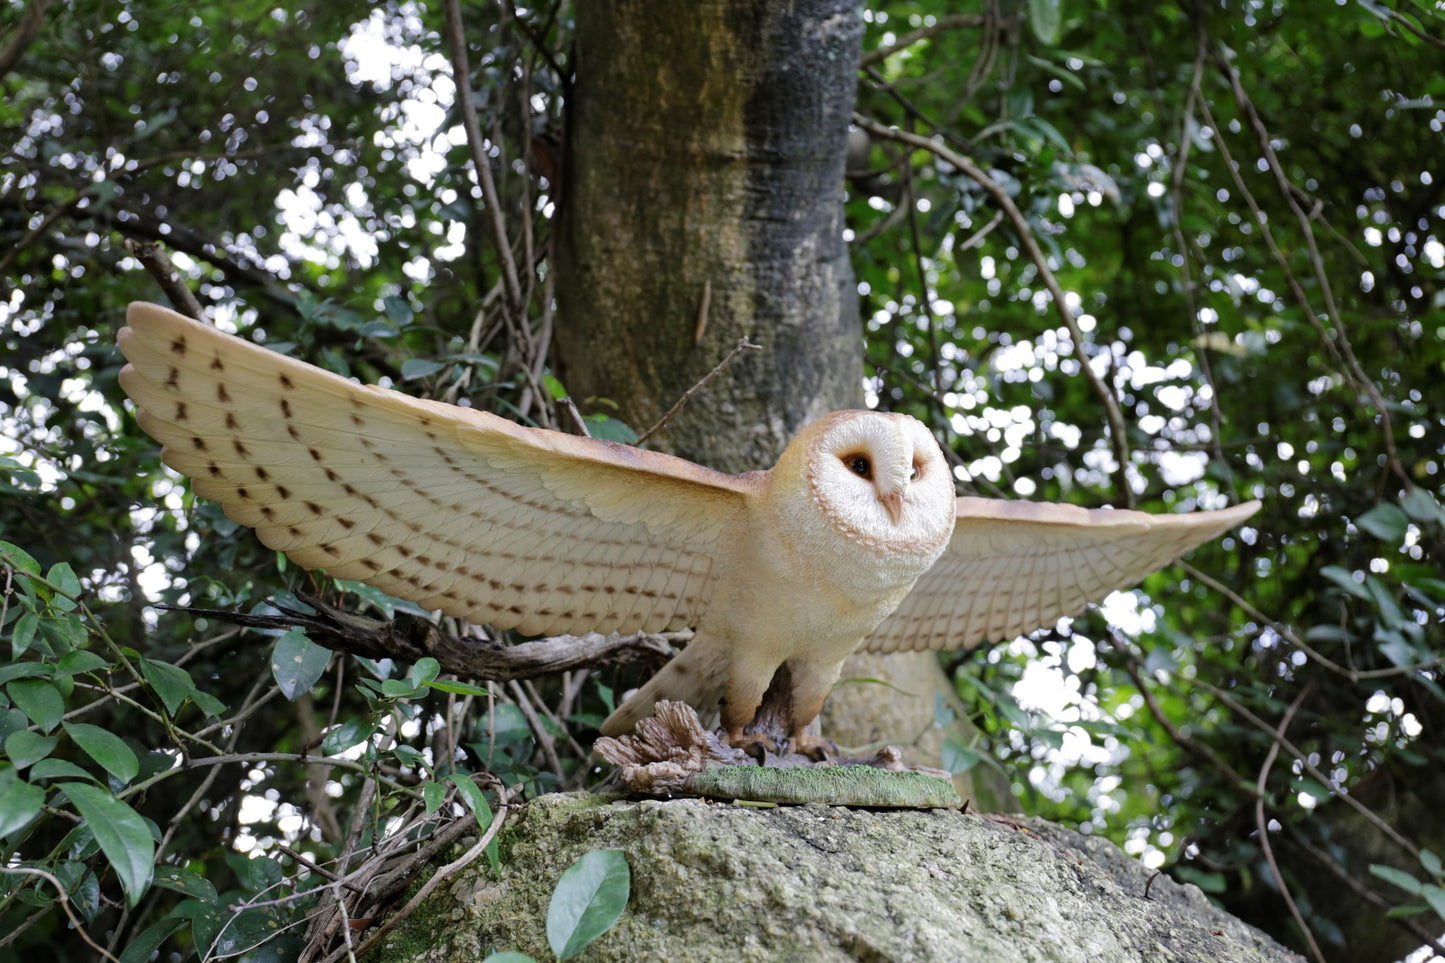 buy a soaring owl statue at auction